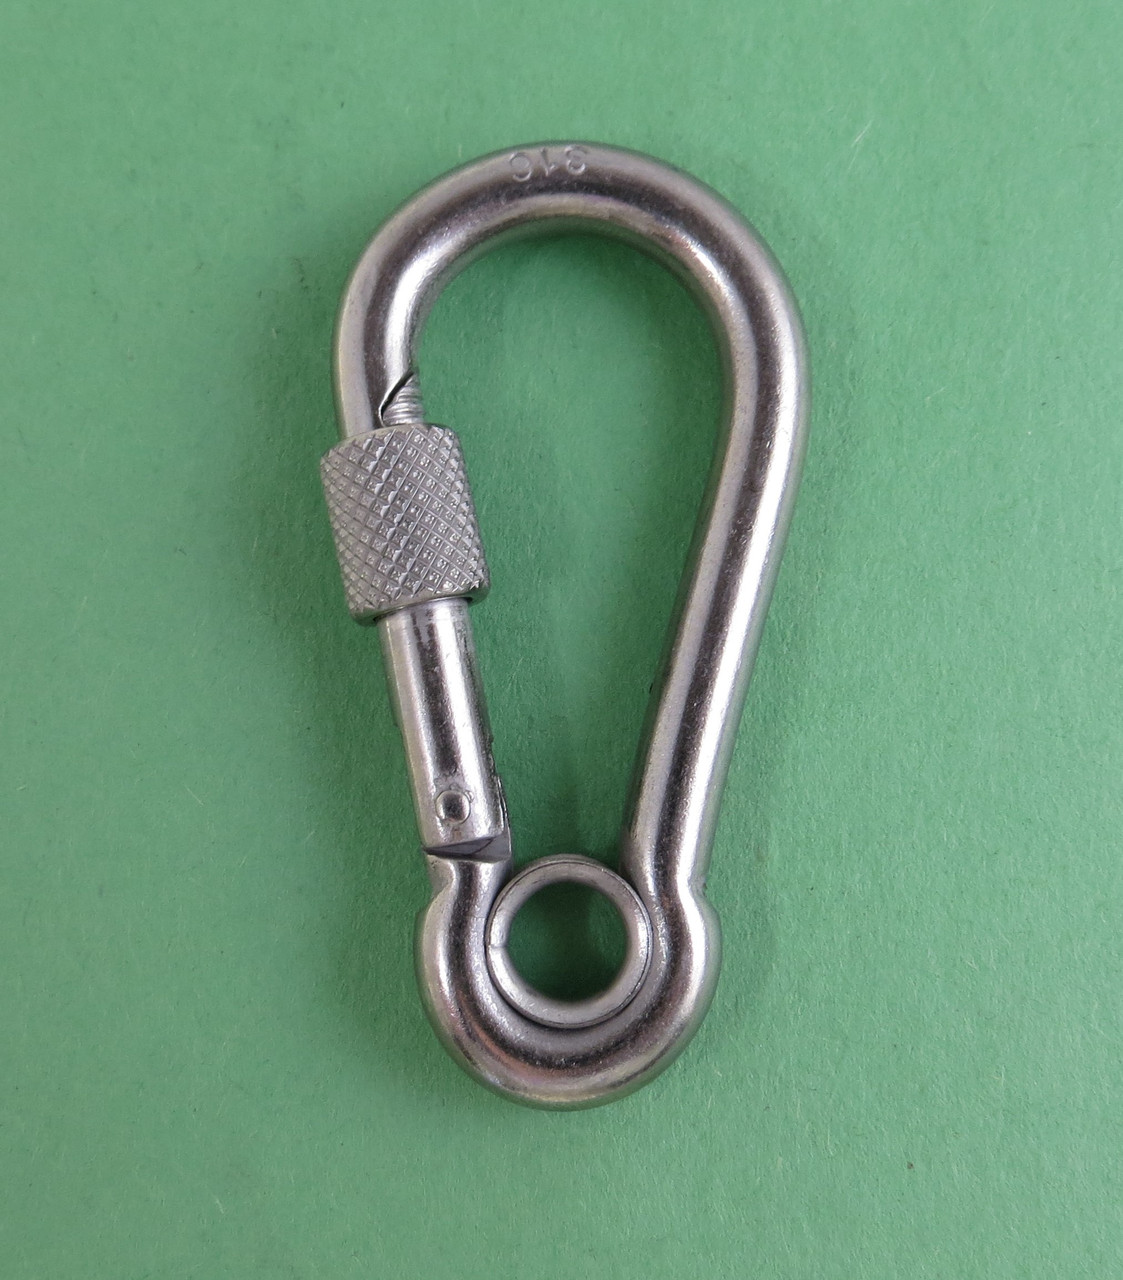 Stainless Steel 316 Spring Hook with Screw Nut and Eyelet Carabiner 1/4  (6mm) Marine Grade - US Stainless